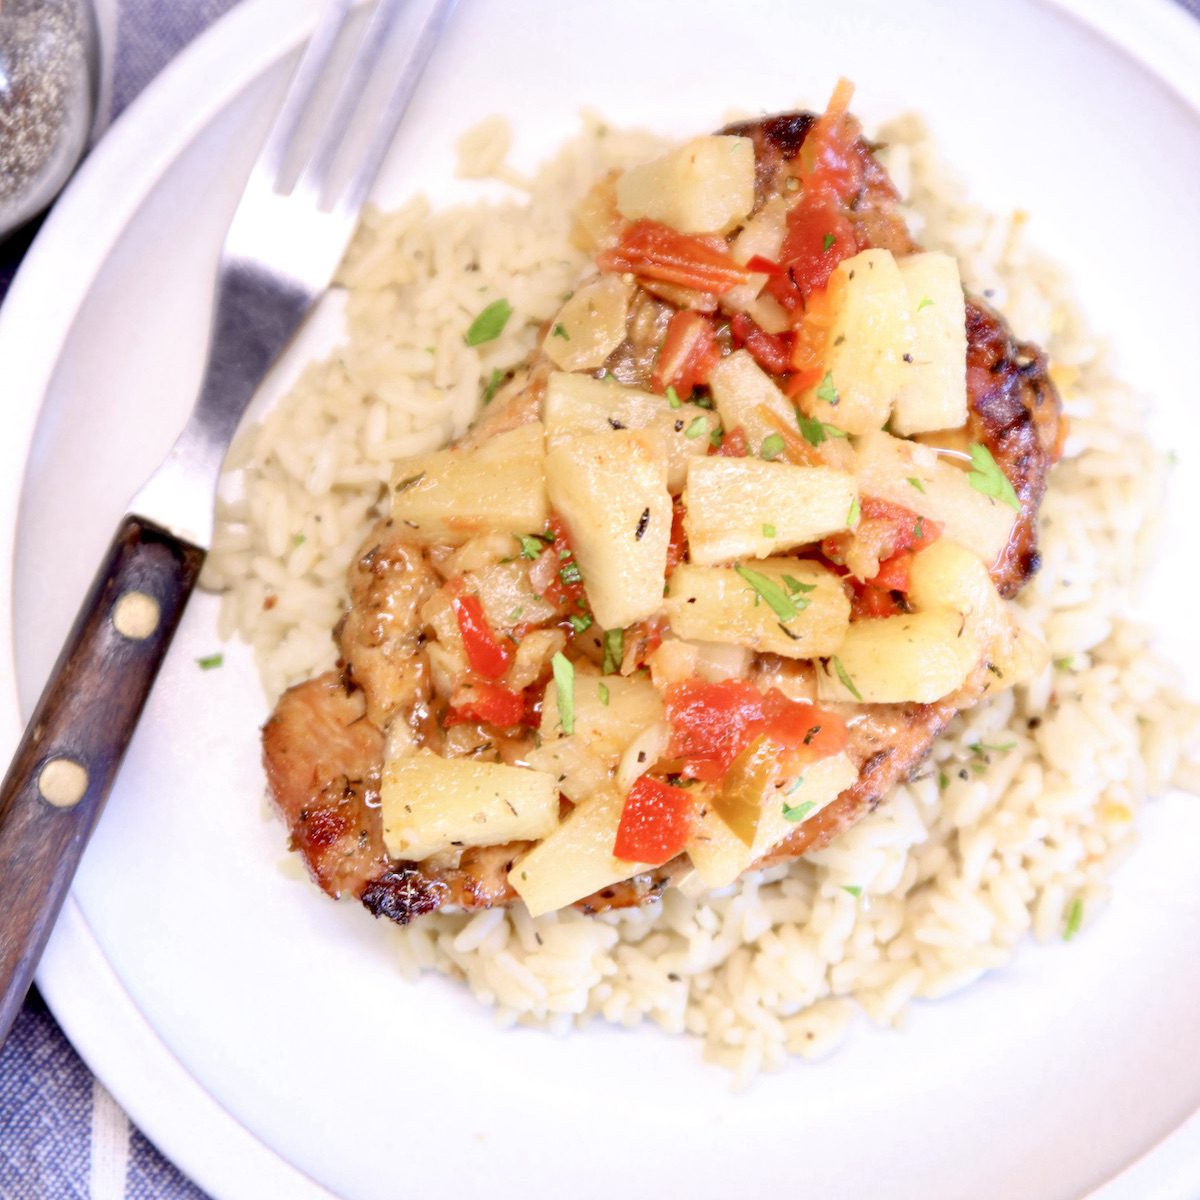 plate of rice, pork chop topped with pineapple salsa